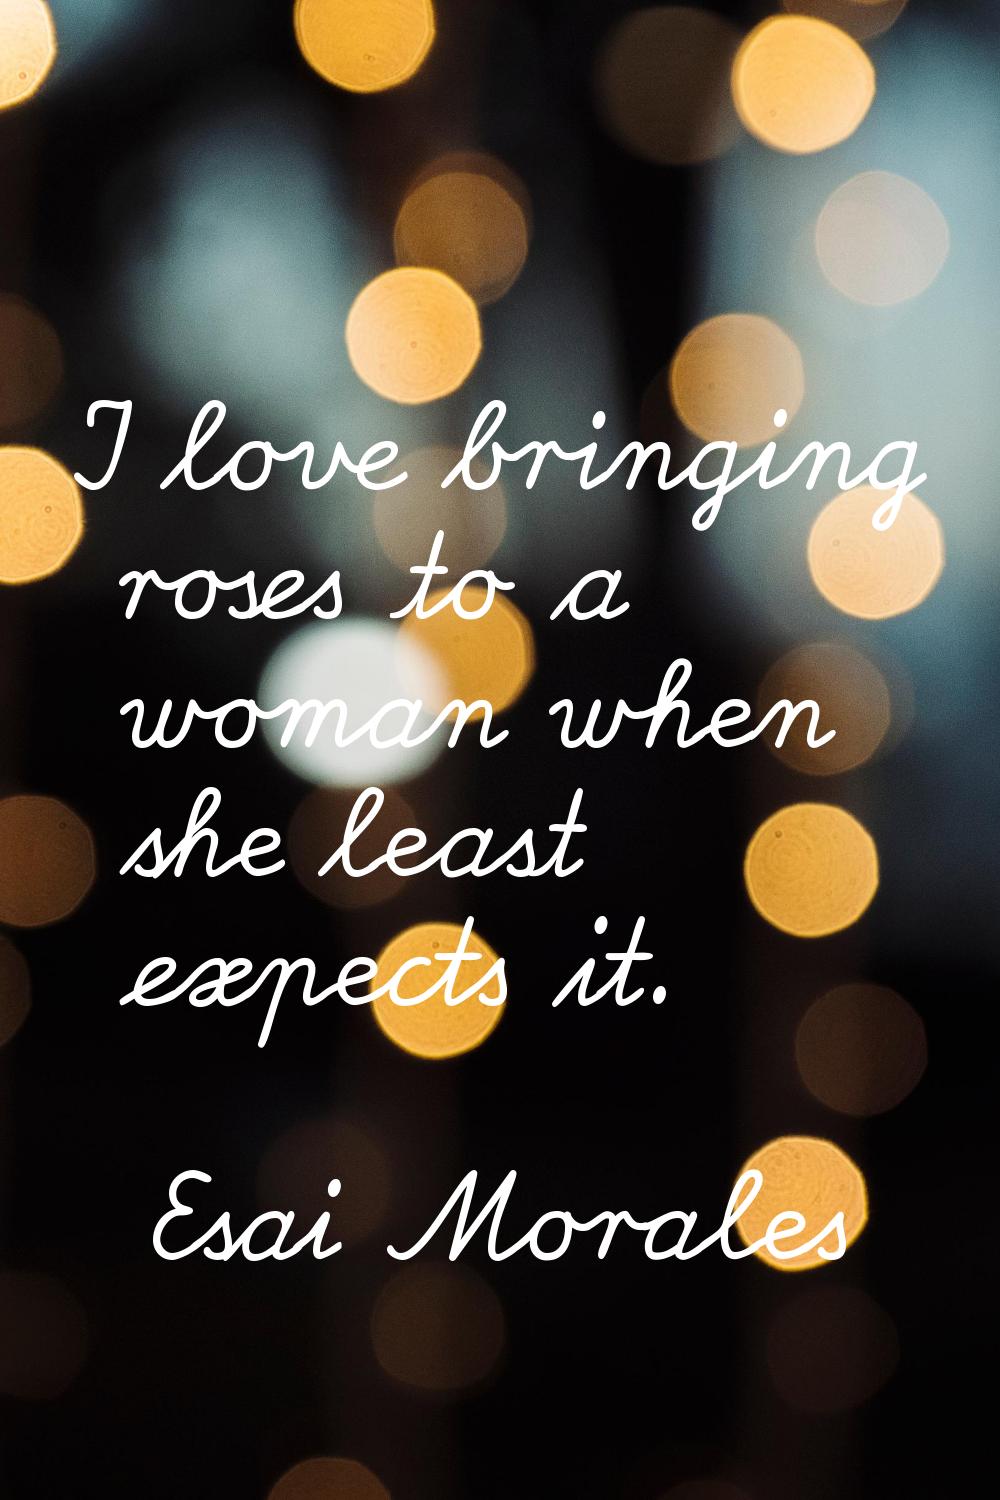 I love bringing roses to a woman when she least expects it.